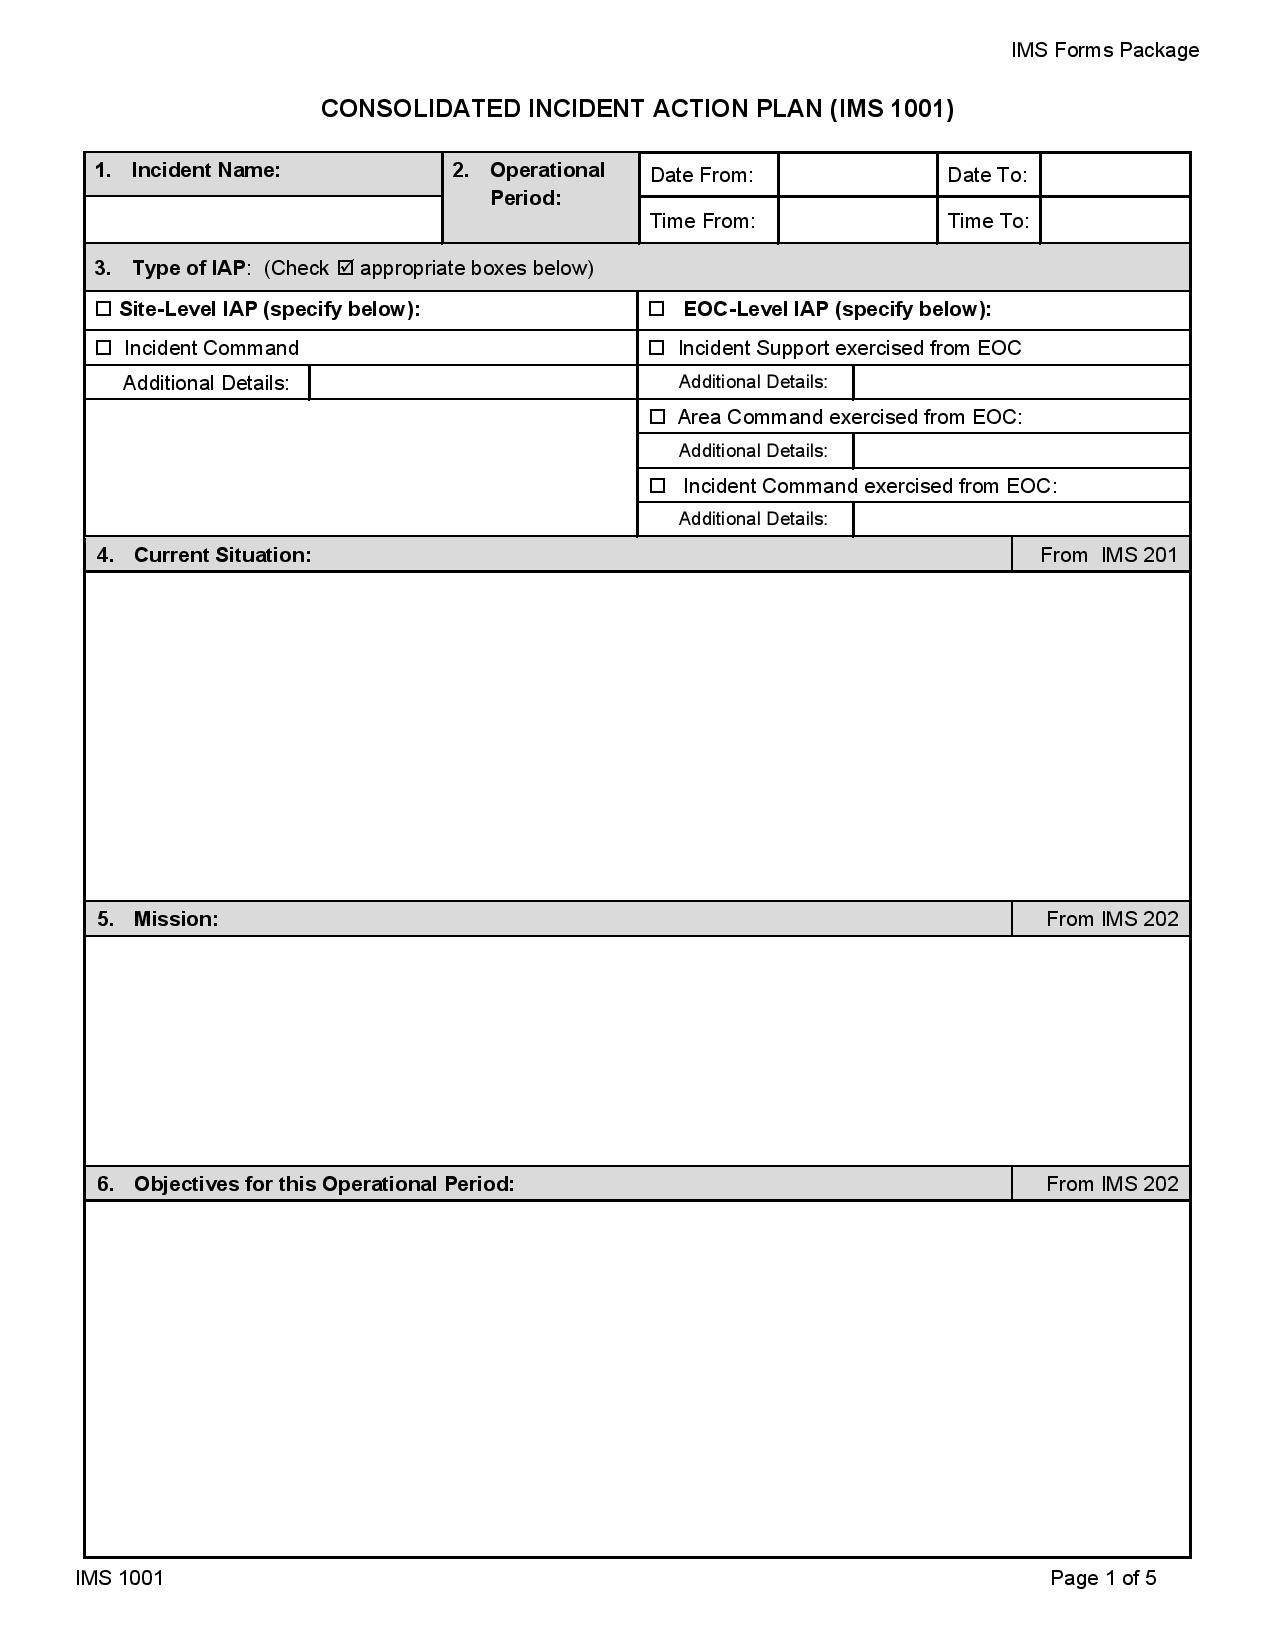 Incident Action Plan Form